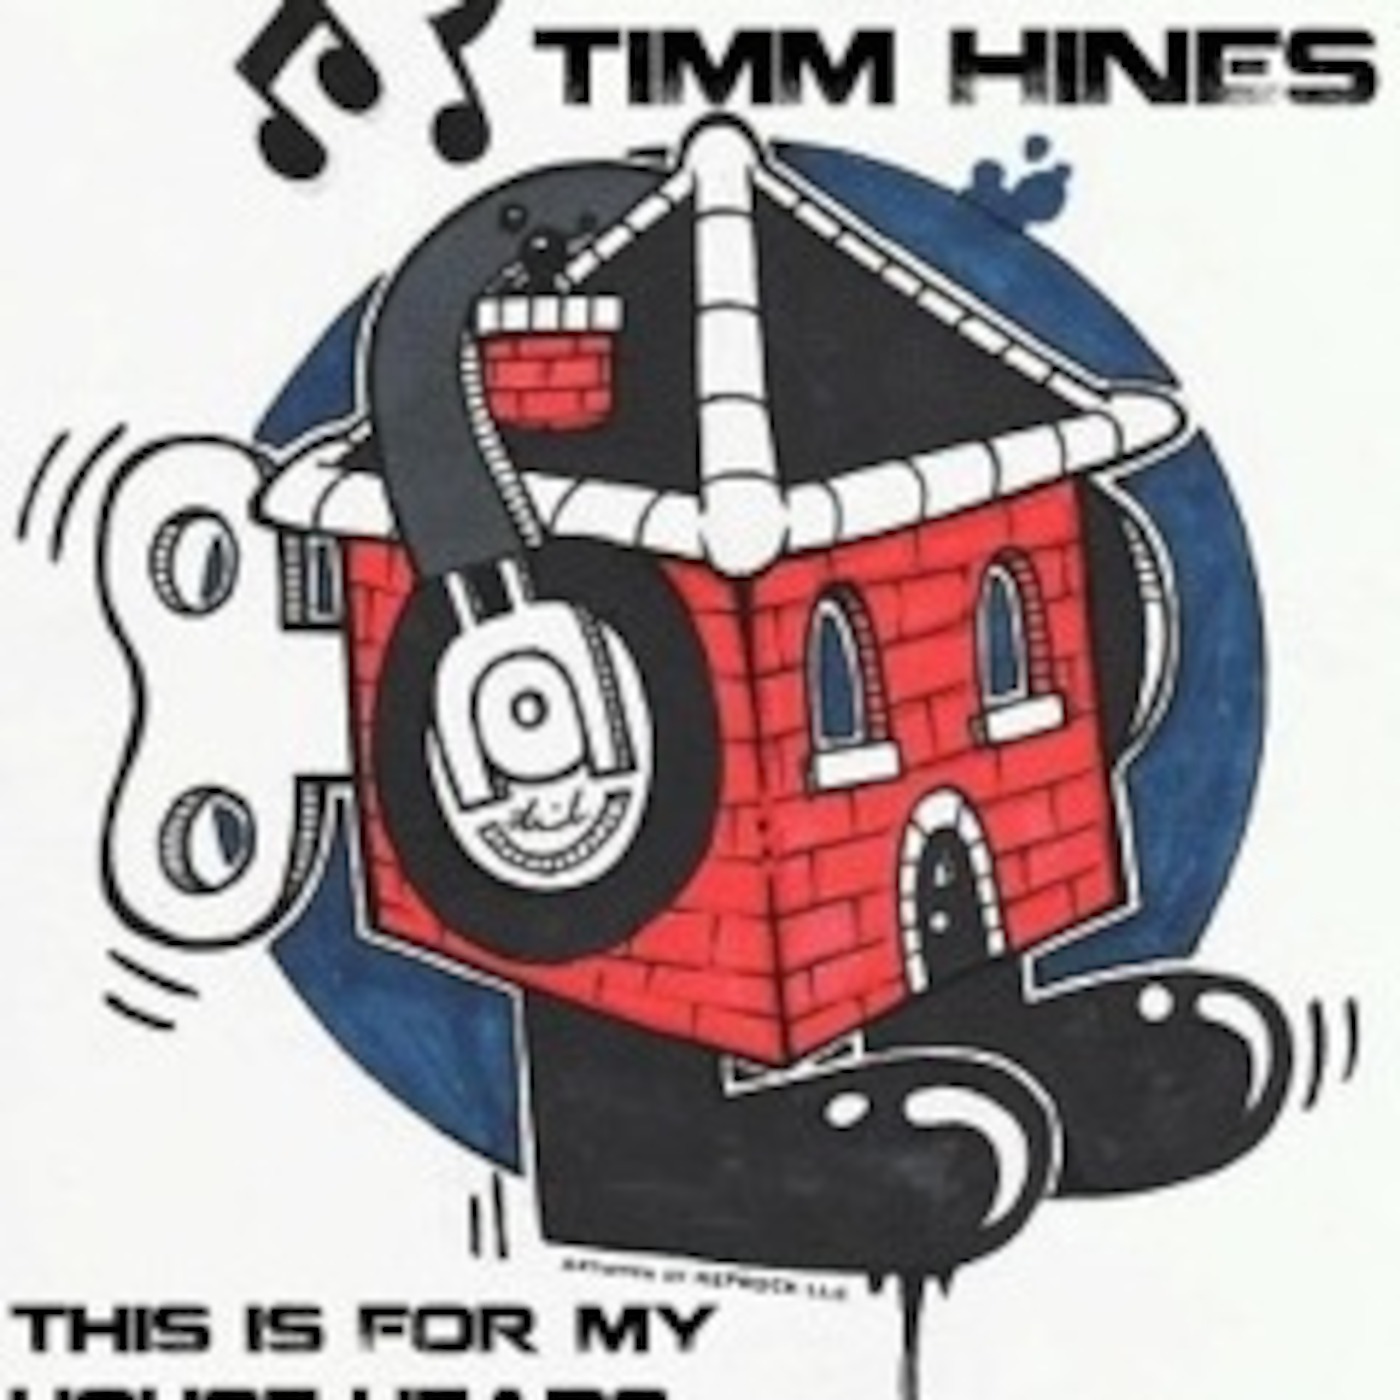 DJ Timm Hines - 'This Is For My House Heads'